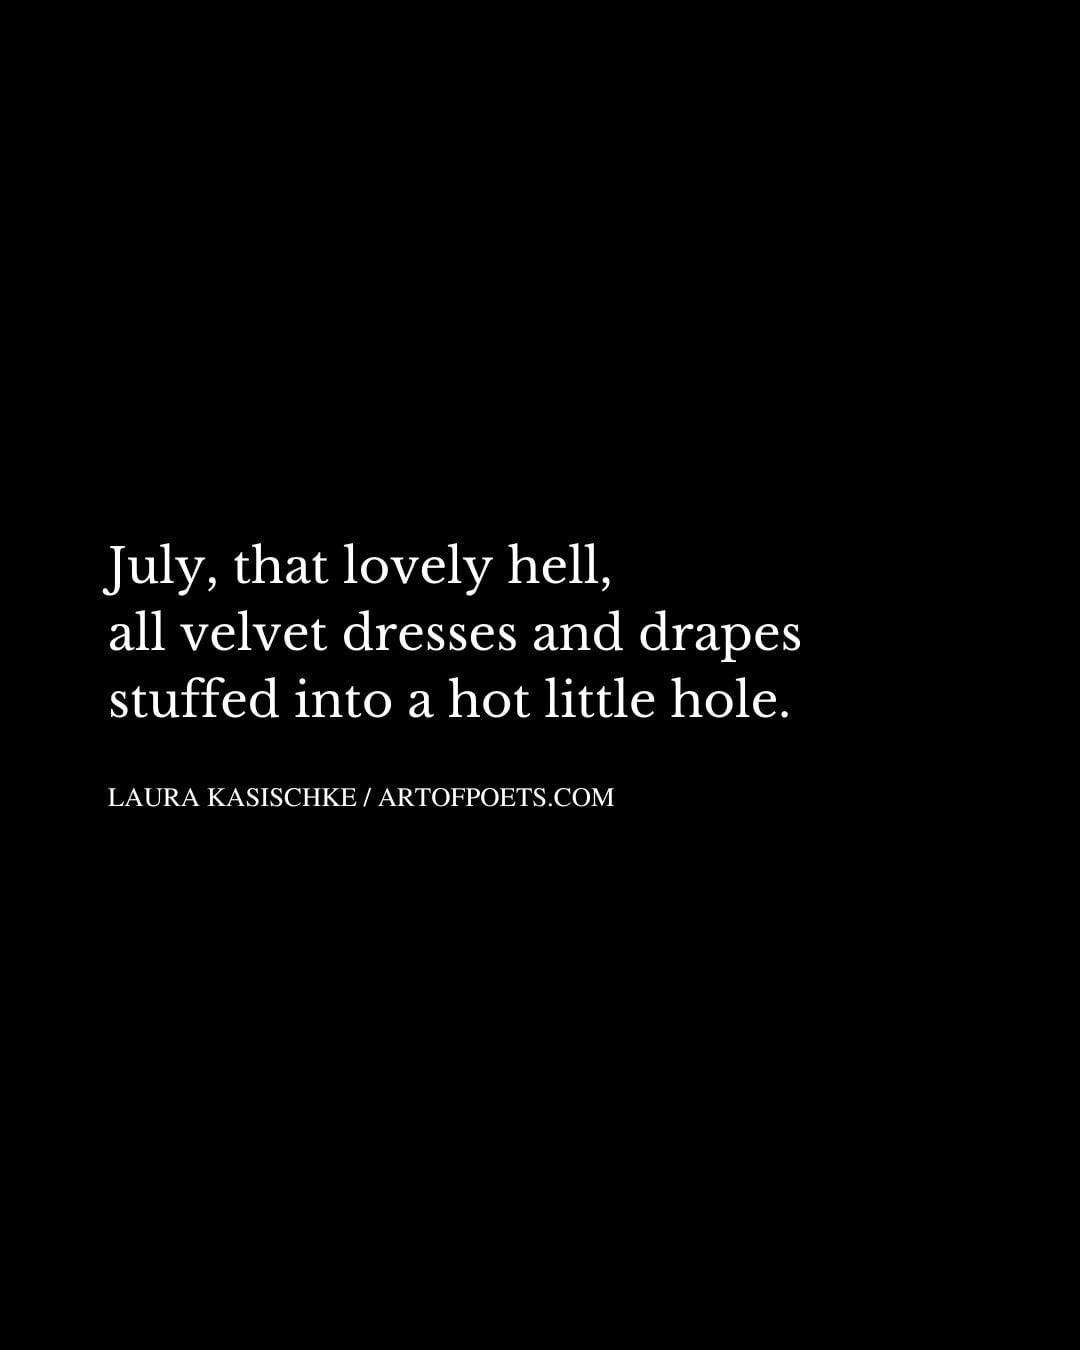 July that lovely hell all velvet dresses and drapes stuffed into a hot little hole